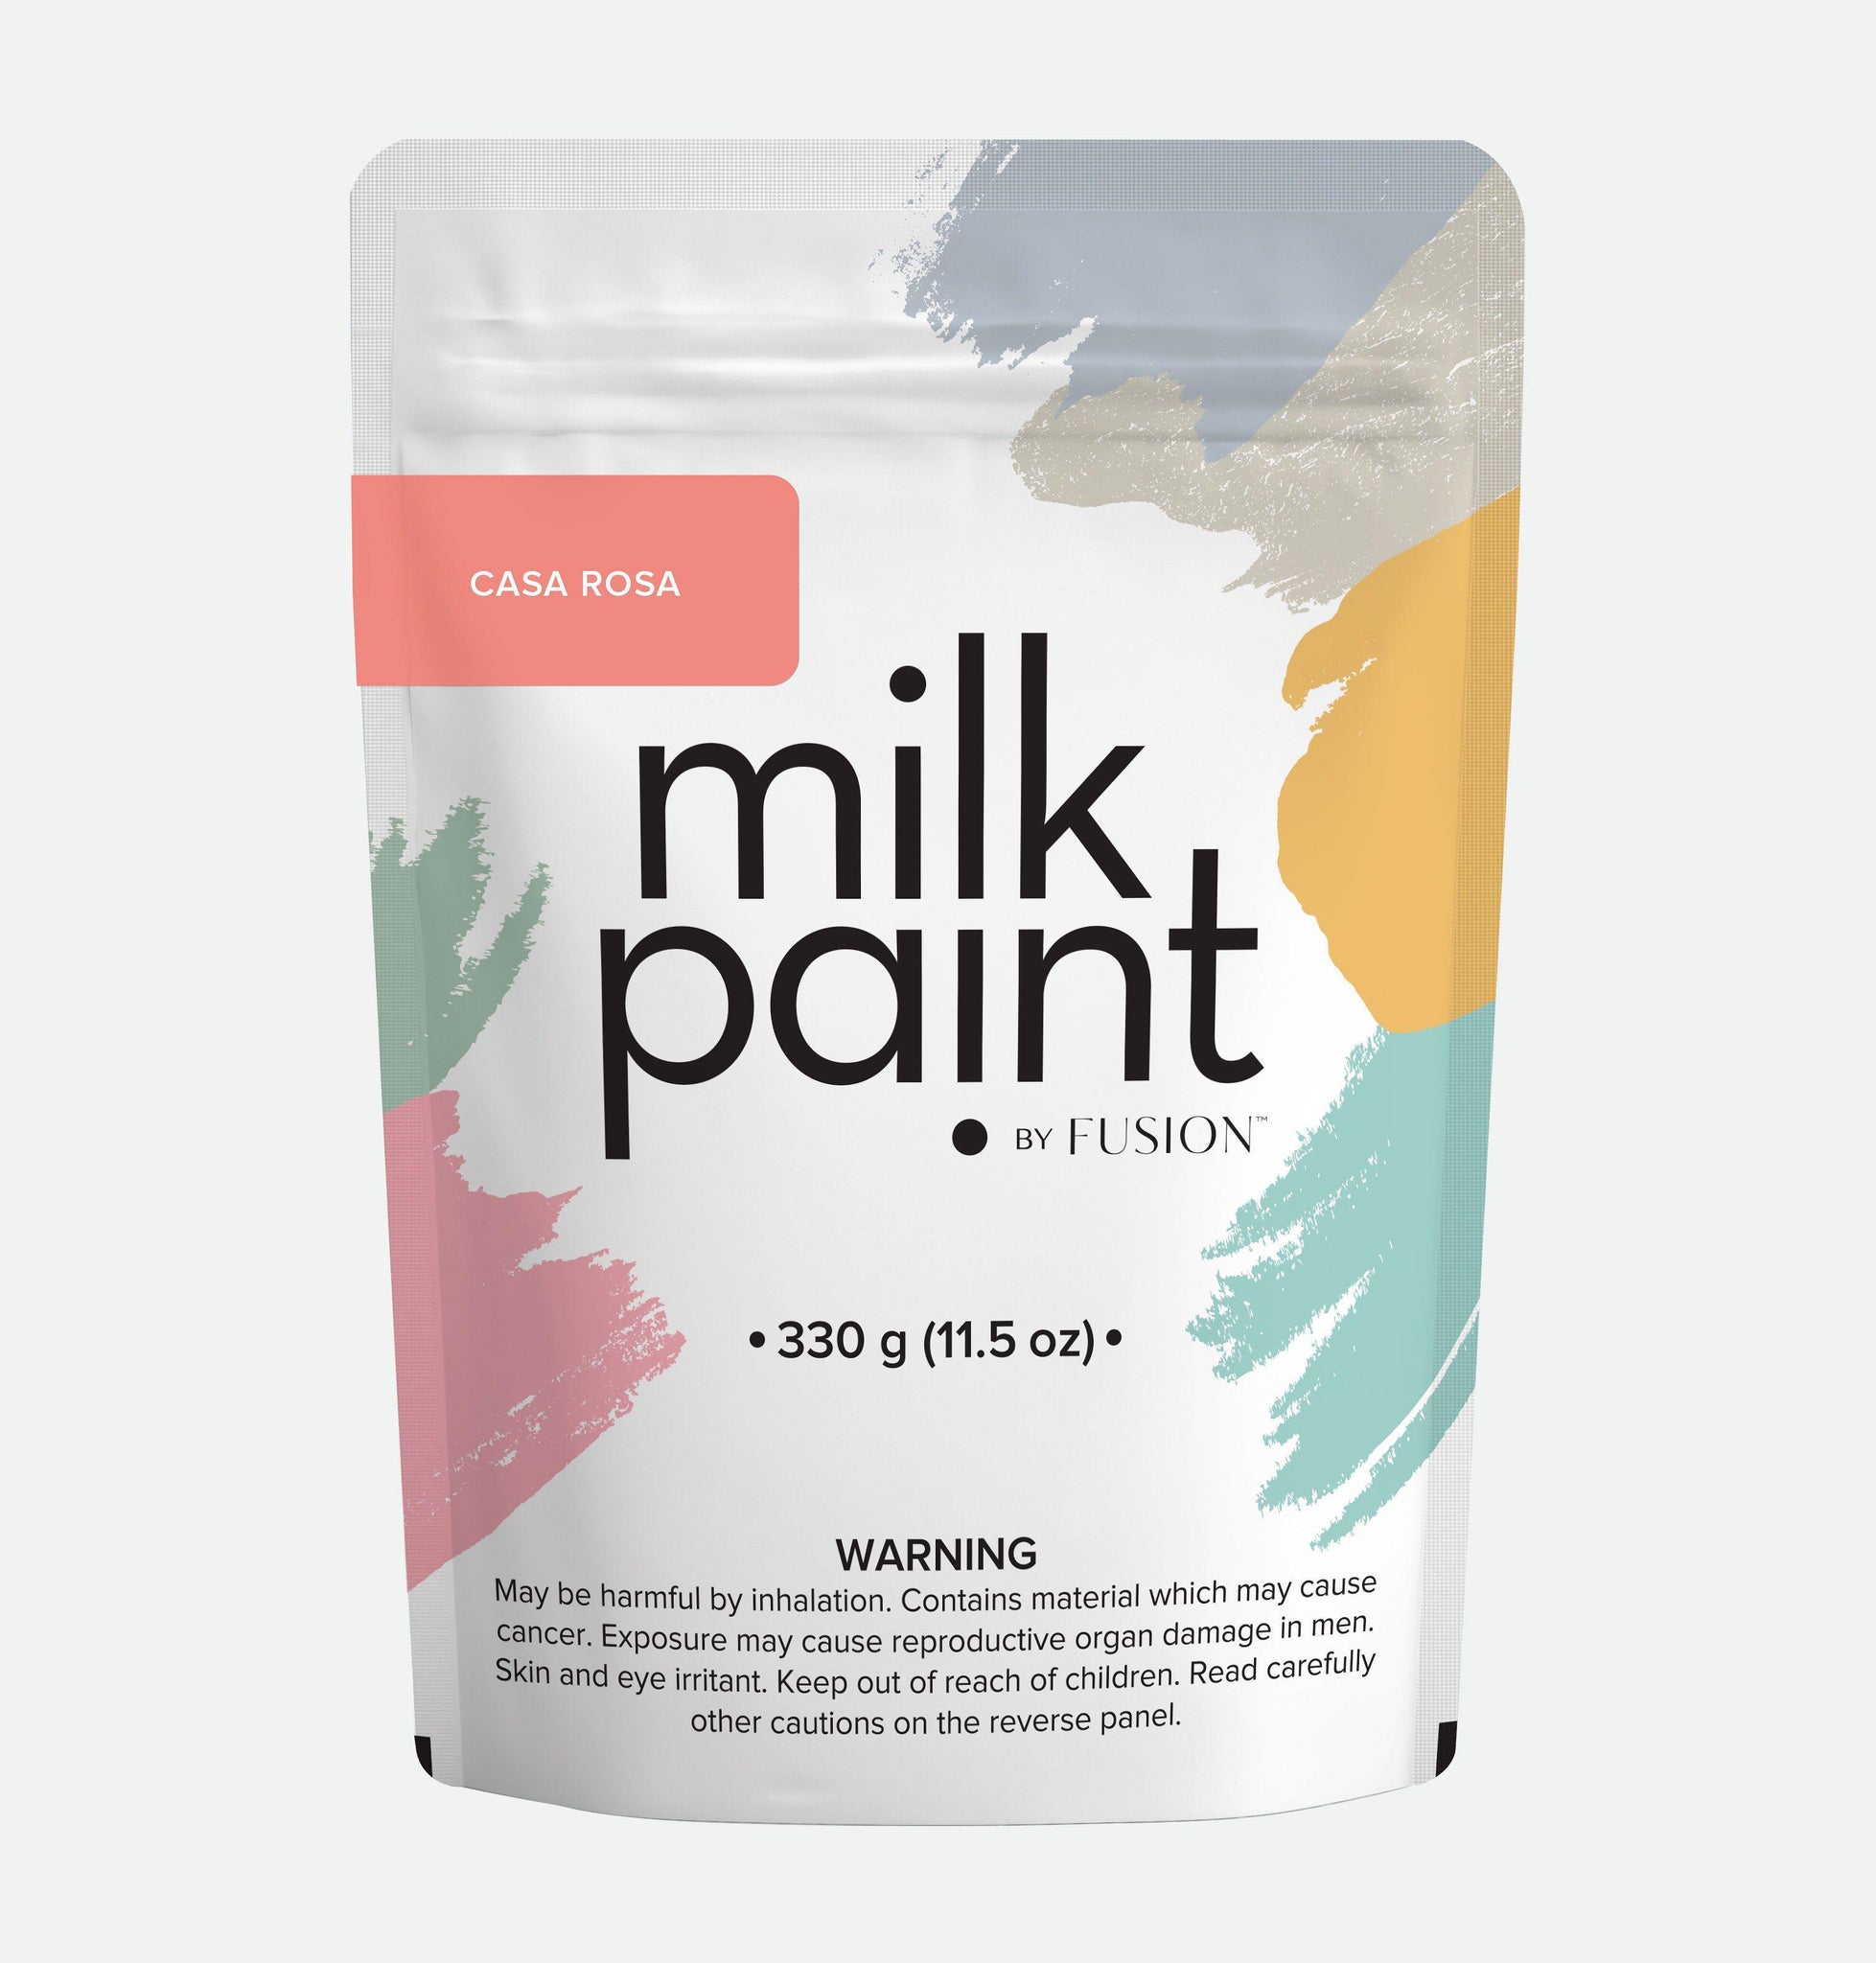 Casa Rosa Milk Paint by Fusion @ Painted Heirloom